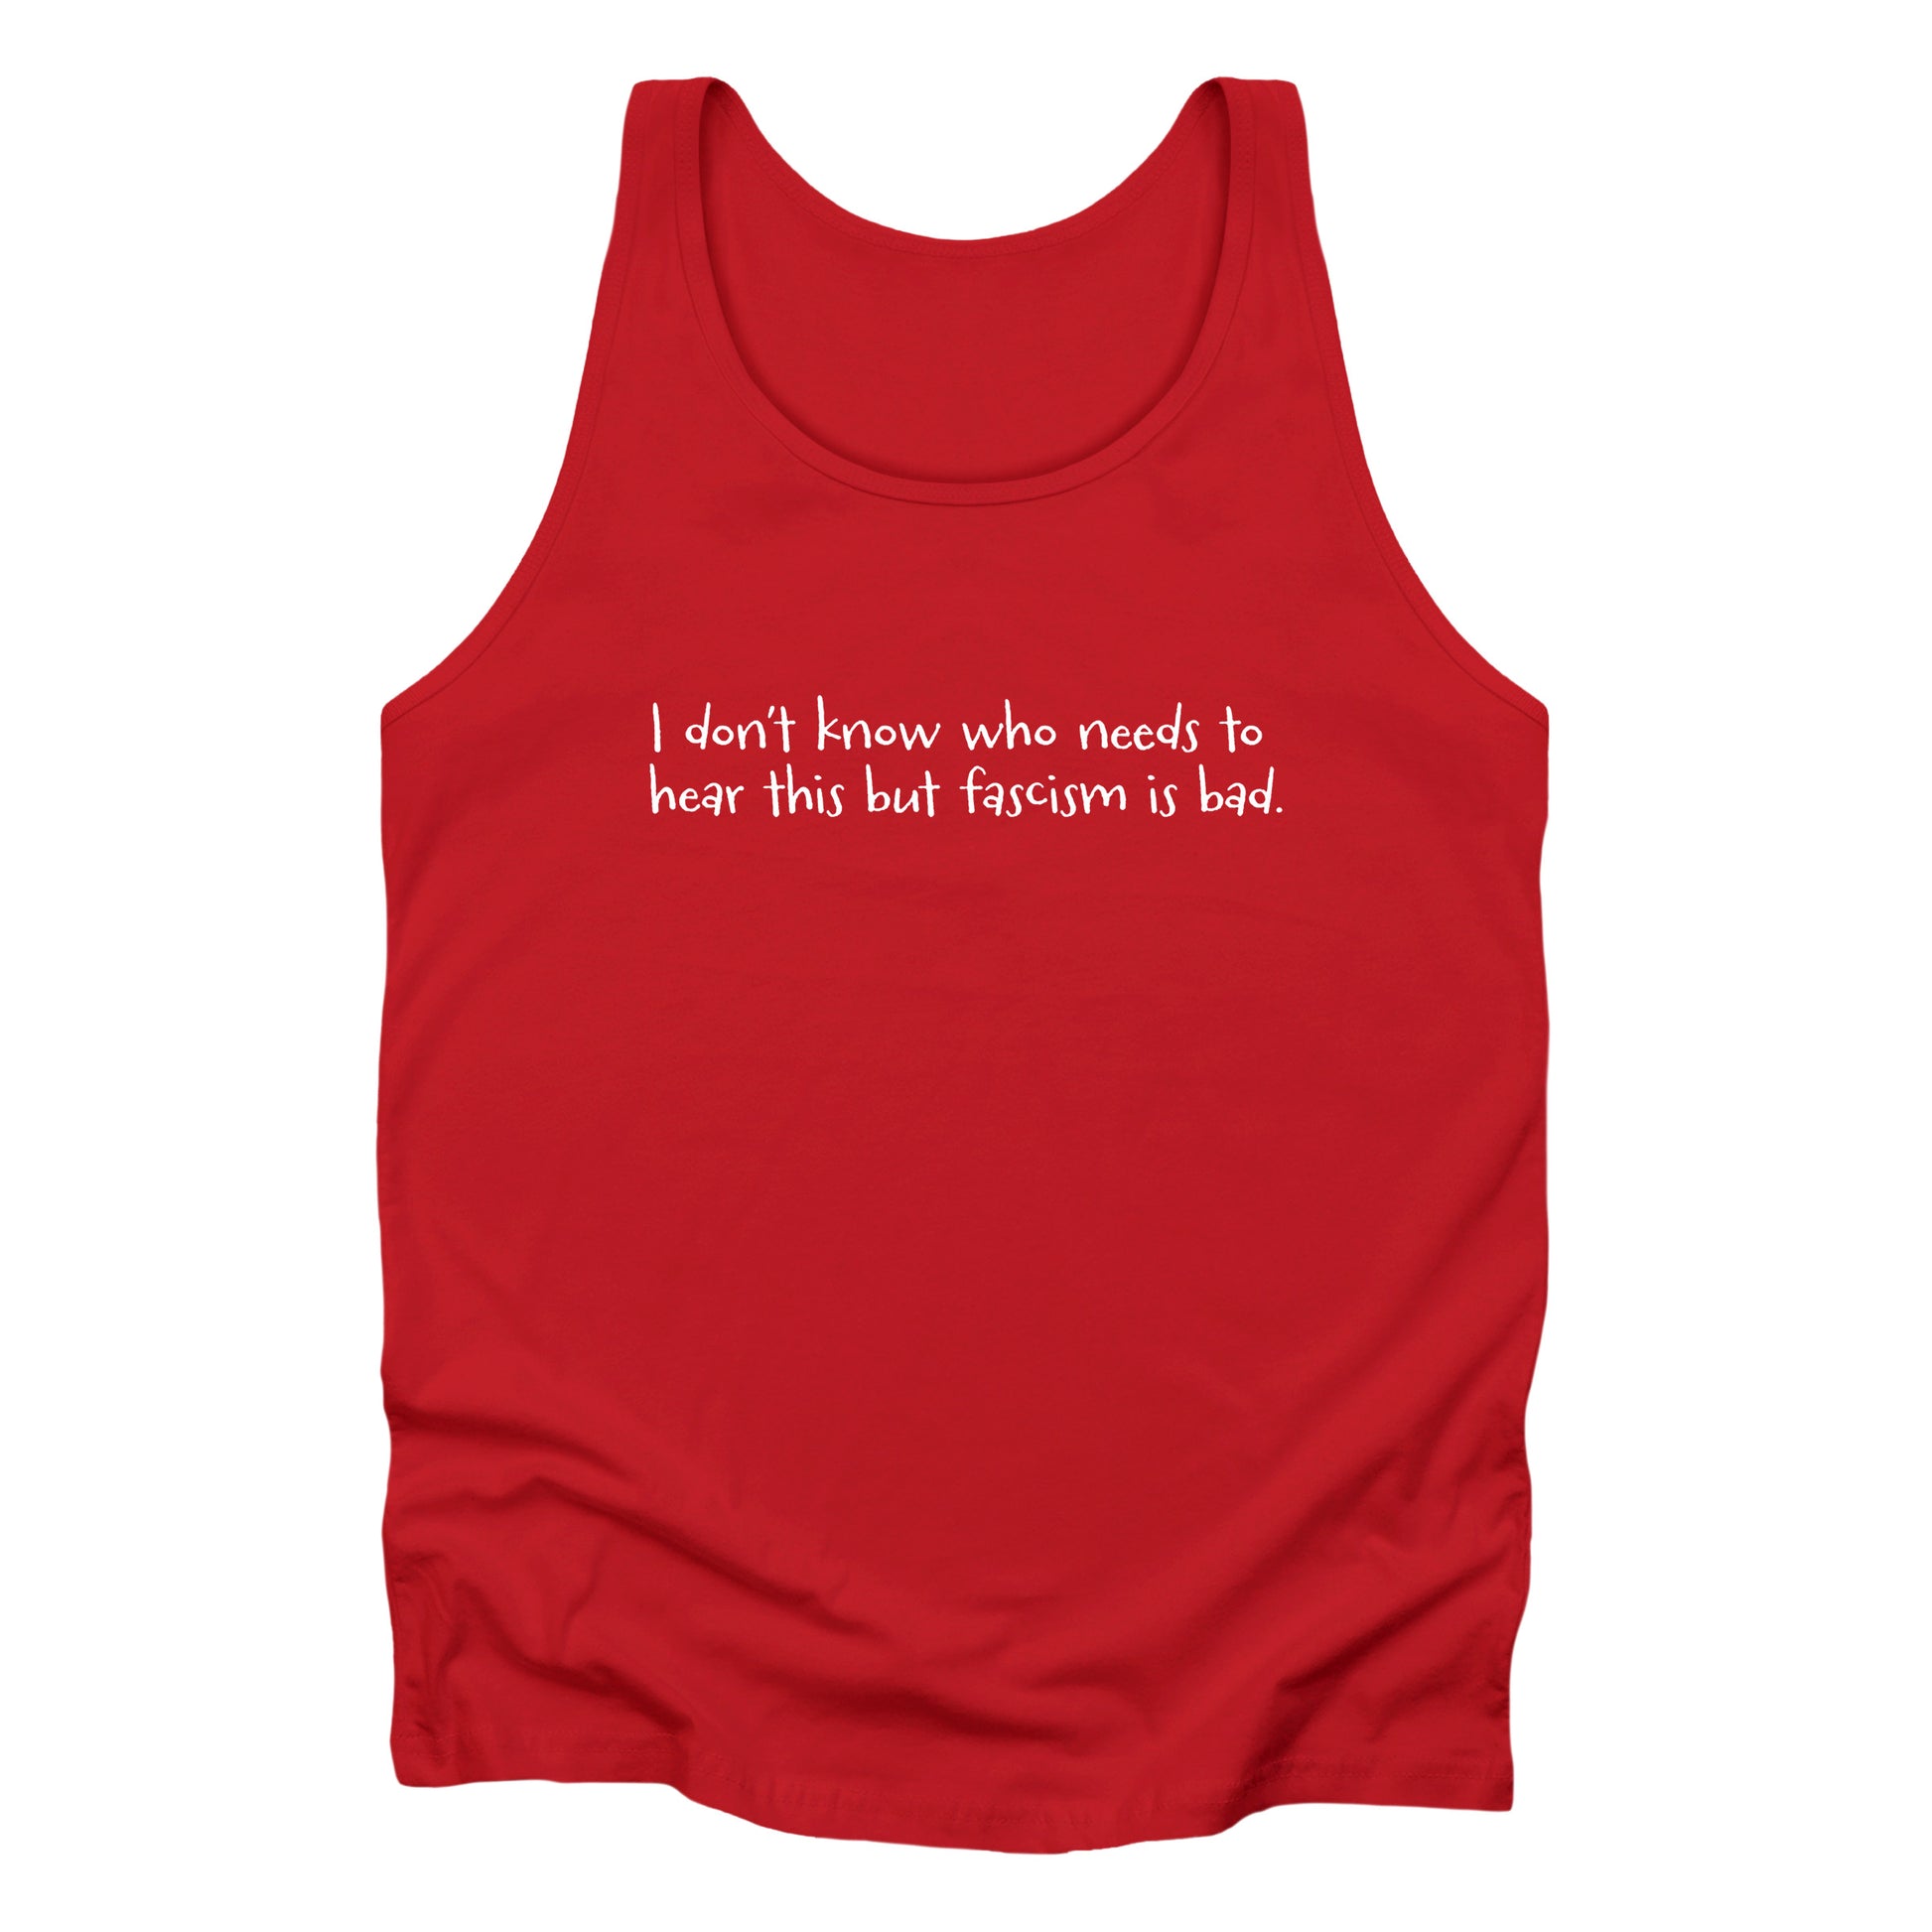 Red unisex tank top that reads in a hand-written font, “I don’t know who needs to hear this but fascism is bad.” It takes up two lines.